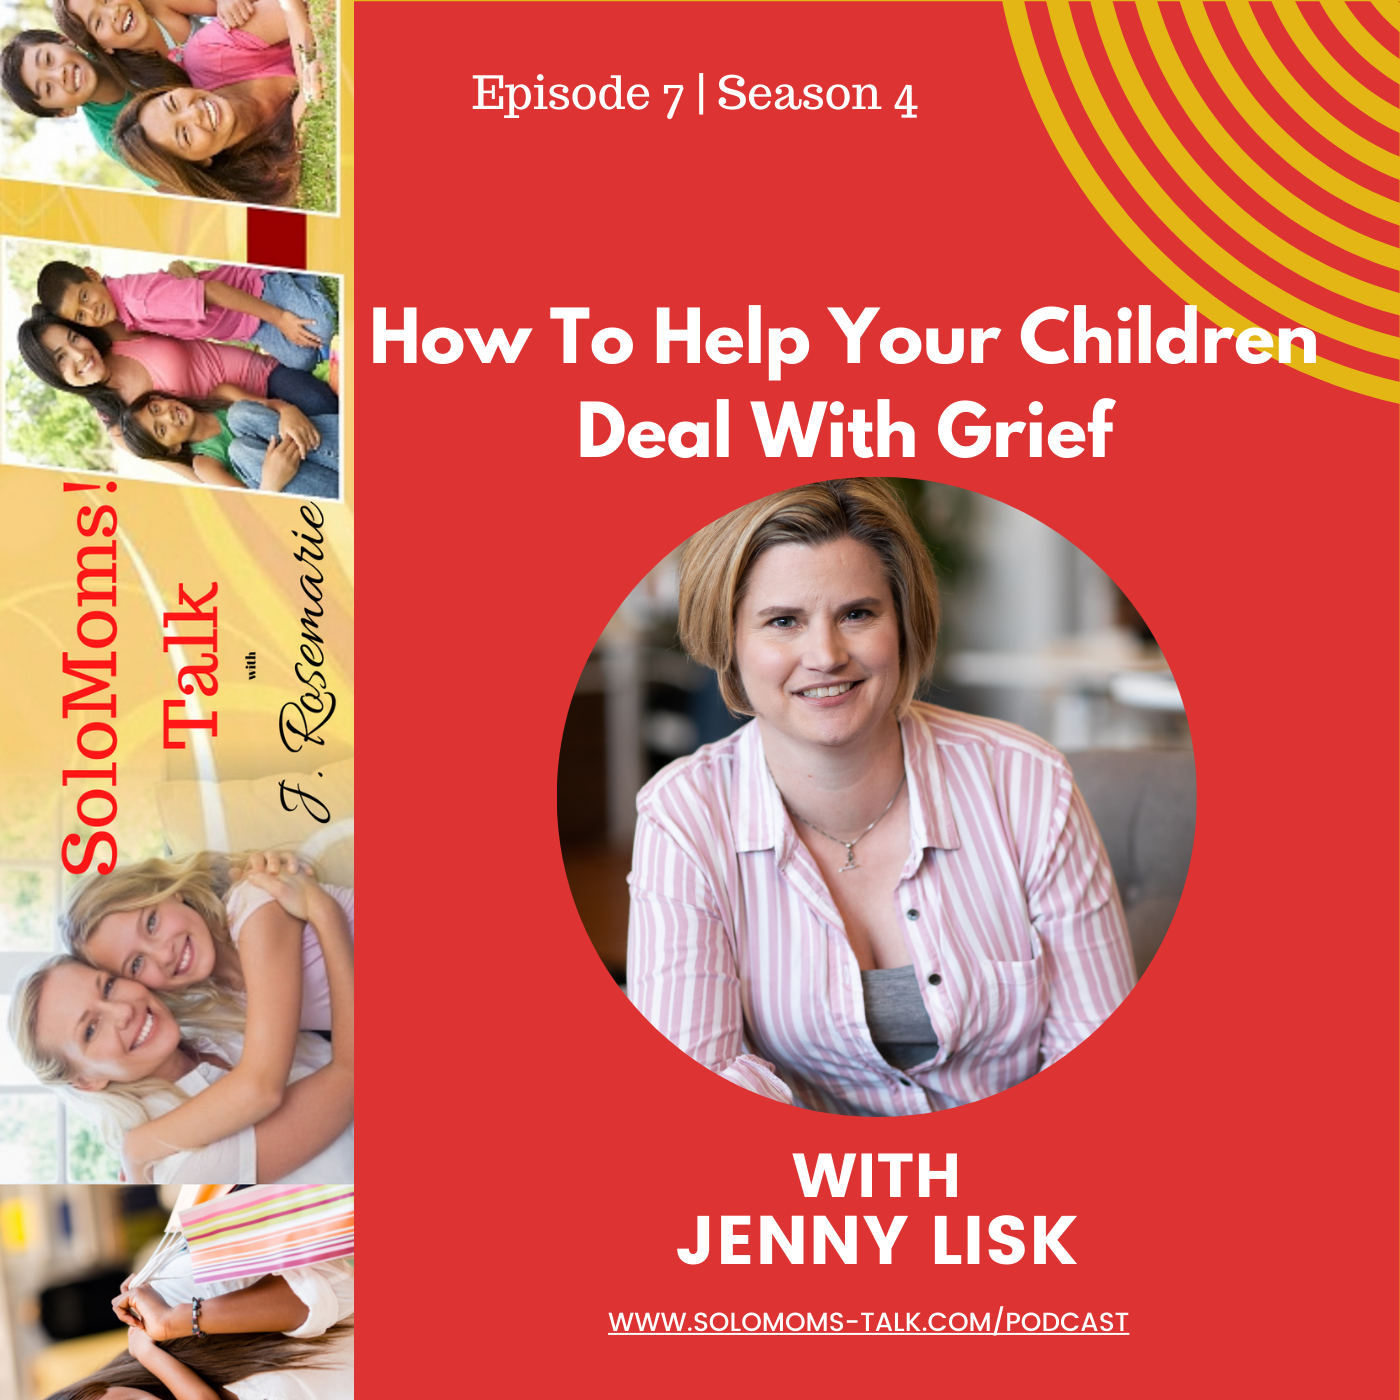 Episode image for How to Help Your Children Deal With Grief w/Jenny Lisk